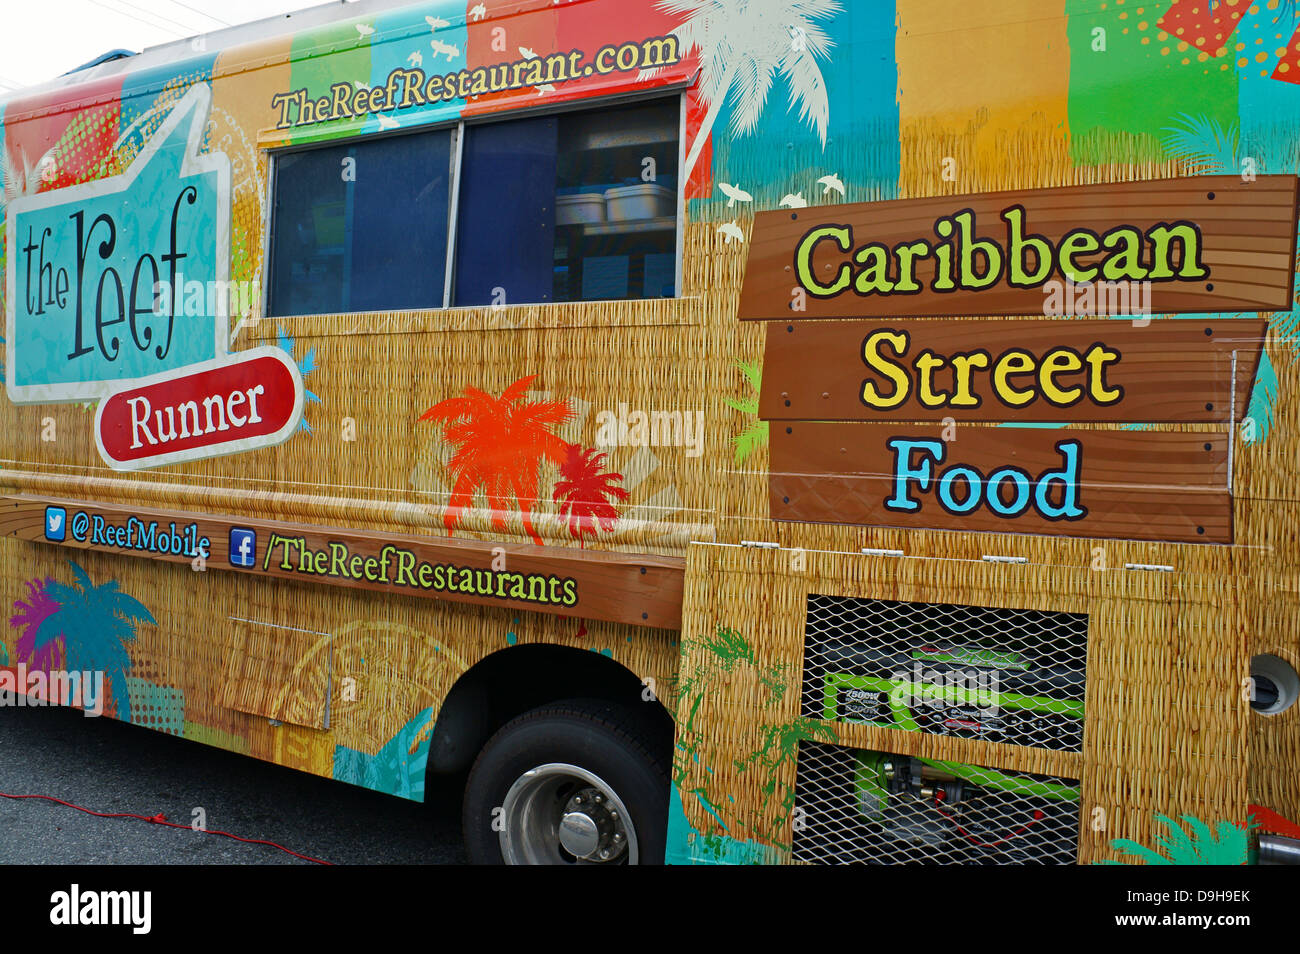 Caribbean street food truck in Vancouver, BC, Canada. Stock Photo